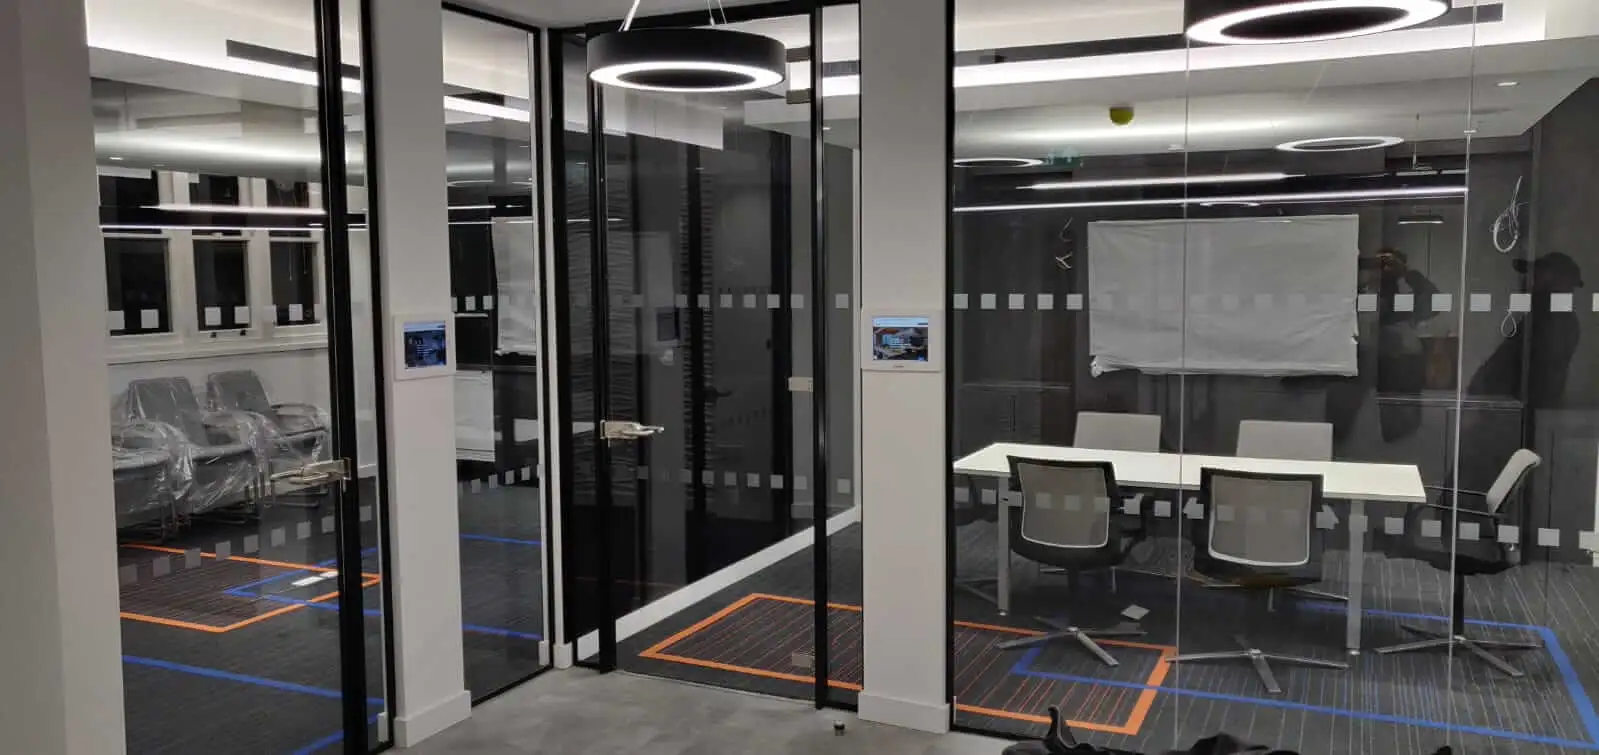 Waiting and meeting spaces with designer floors and black framed glass partitions